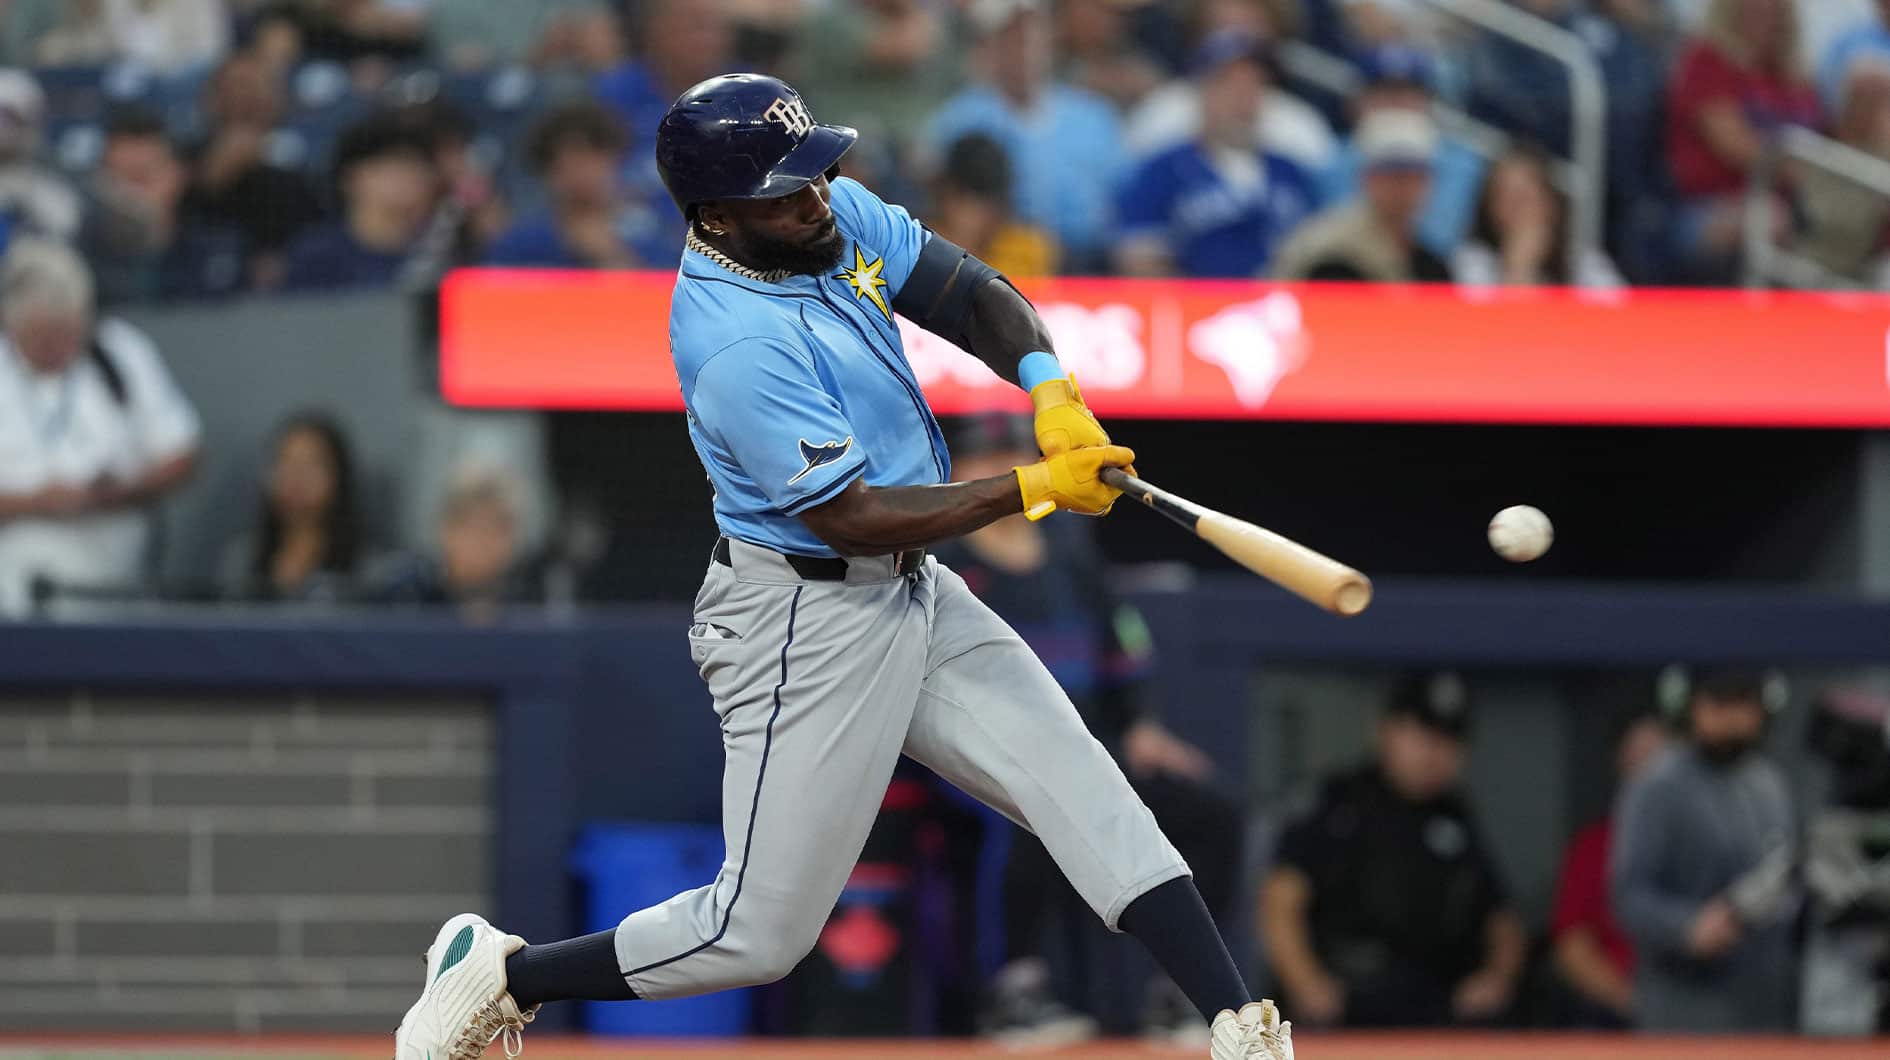 Tampa Bay Rays left fielder Randy Arozarena (56) hits a RBI single against the Toronto Blue Jays during the sixth inning at Rogers Centre.